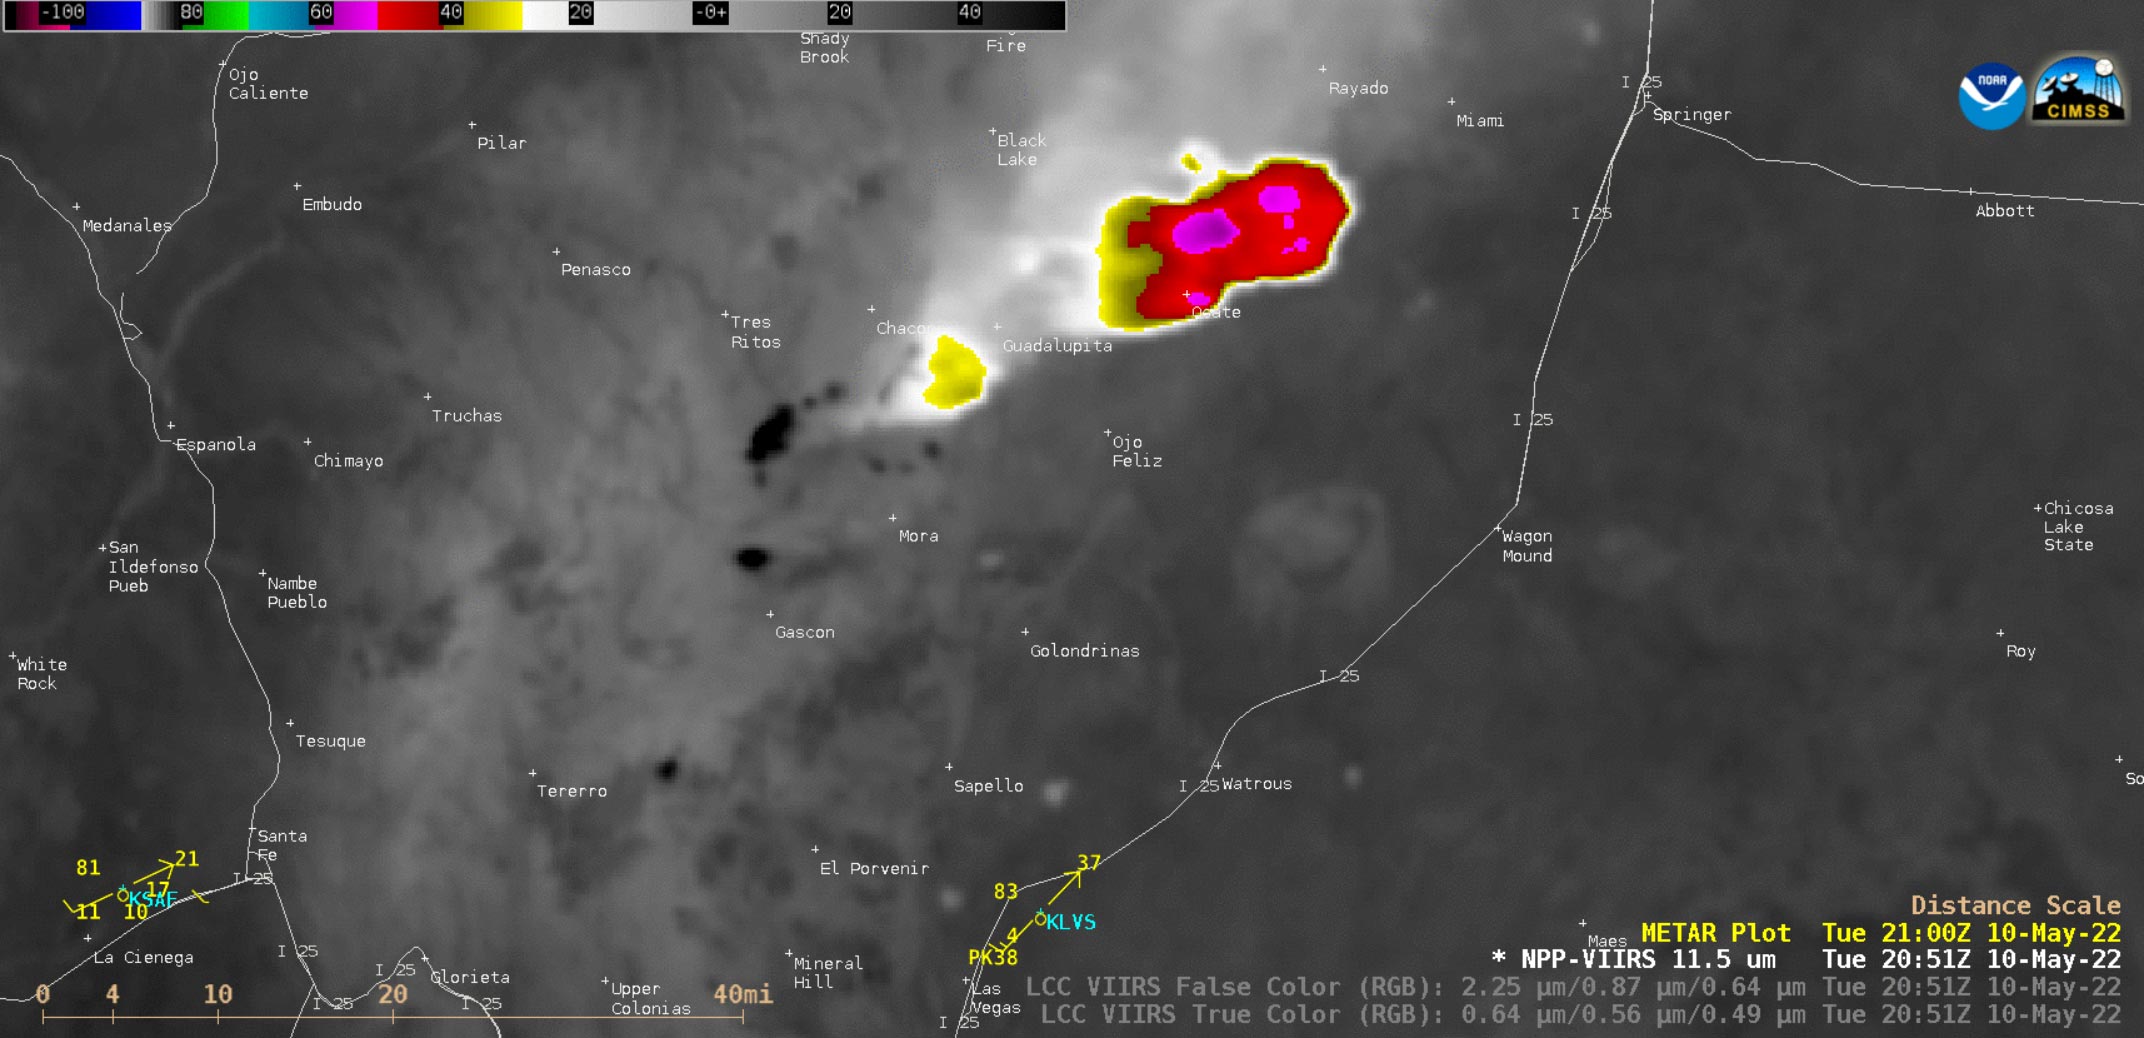 Massive New Mexico Wildfire Spawns 7.5 Mile Fire Cloud - SciTechDaily